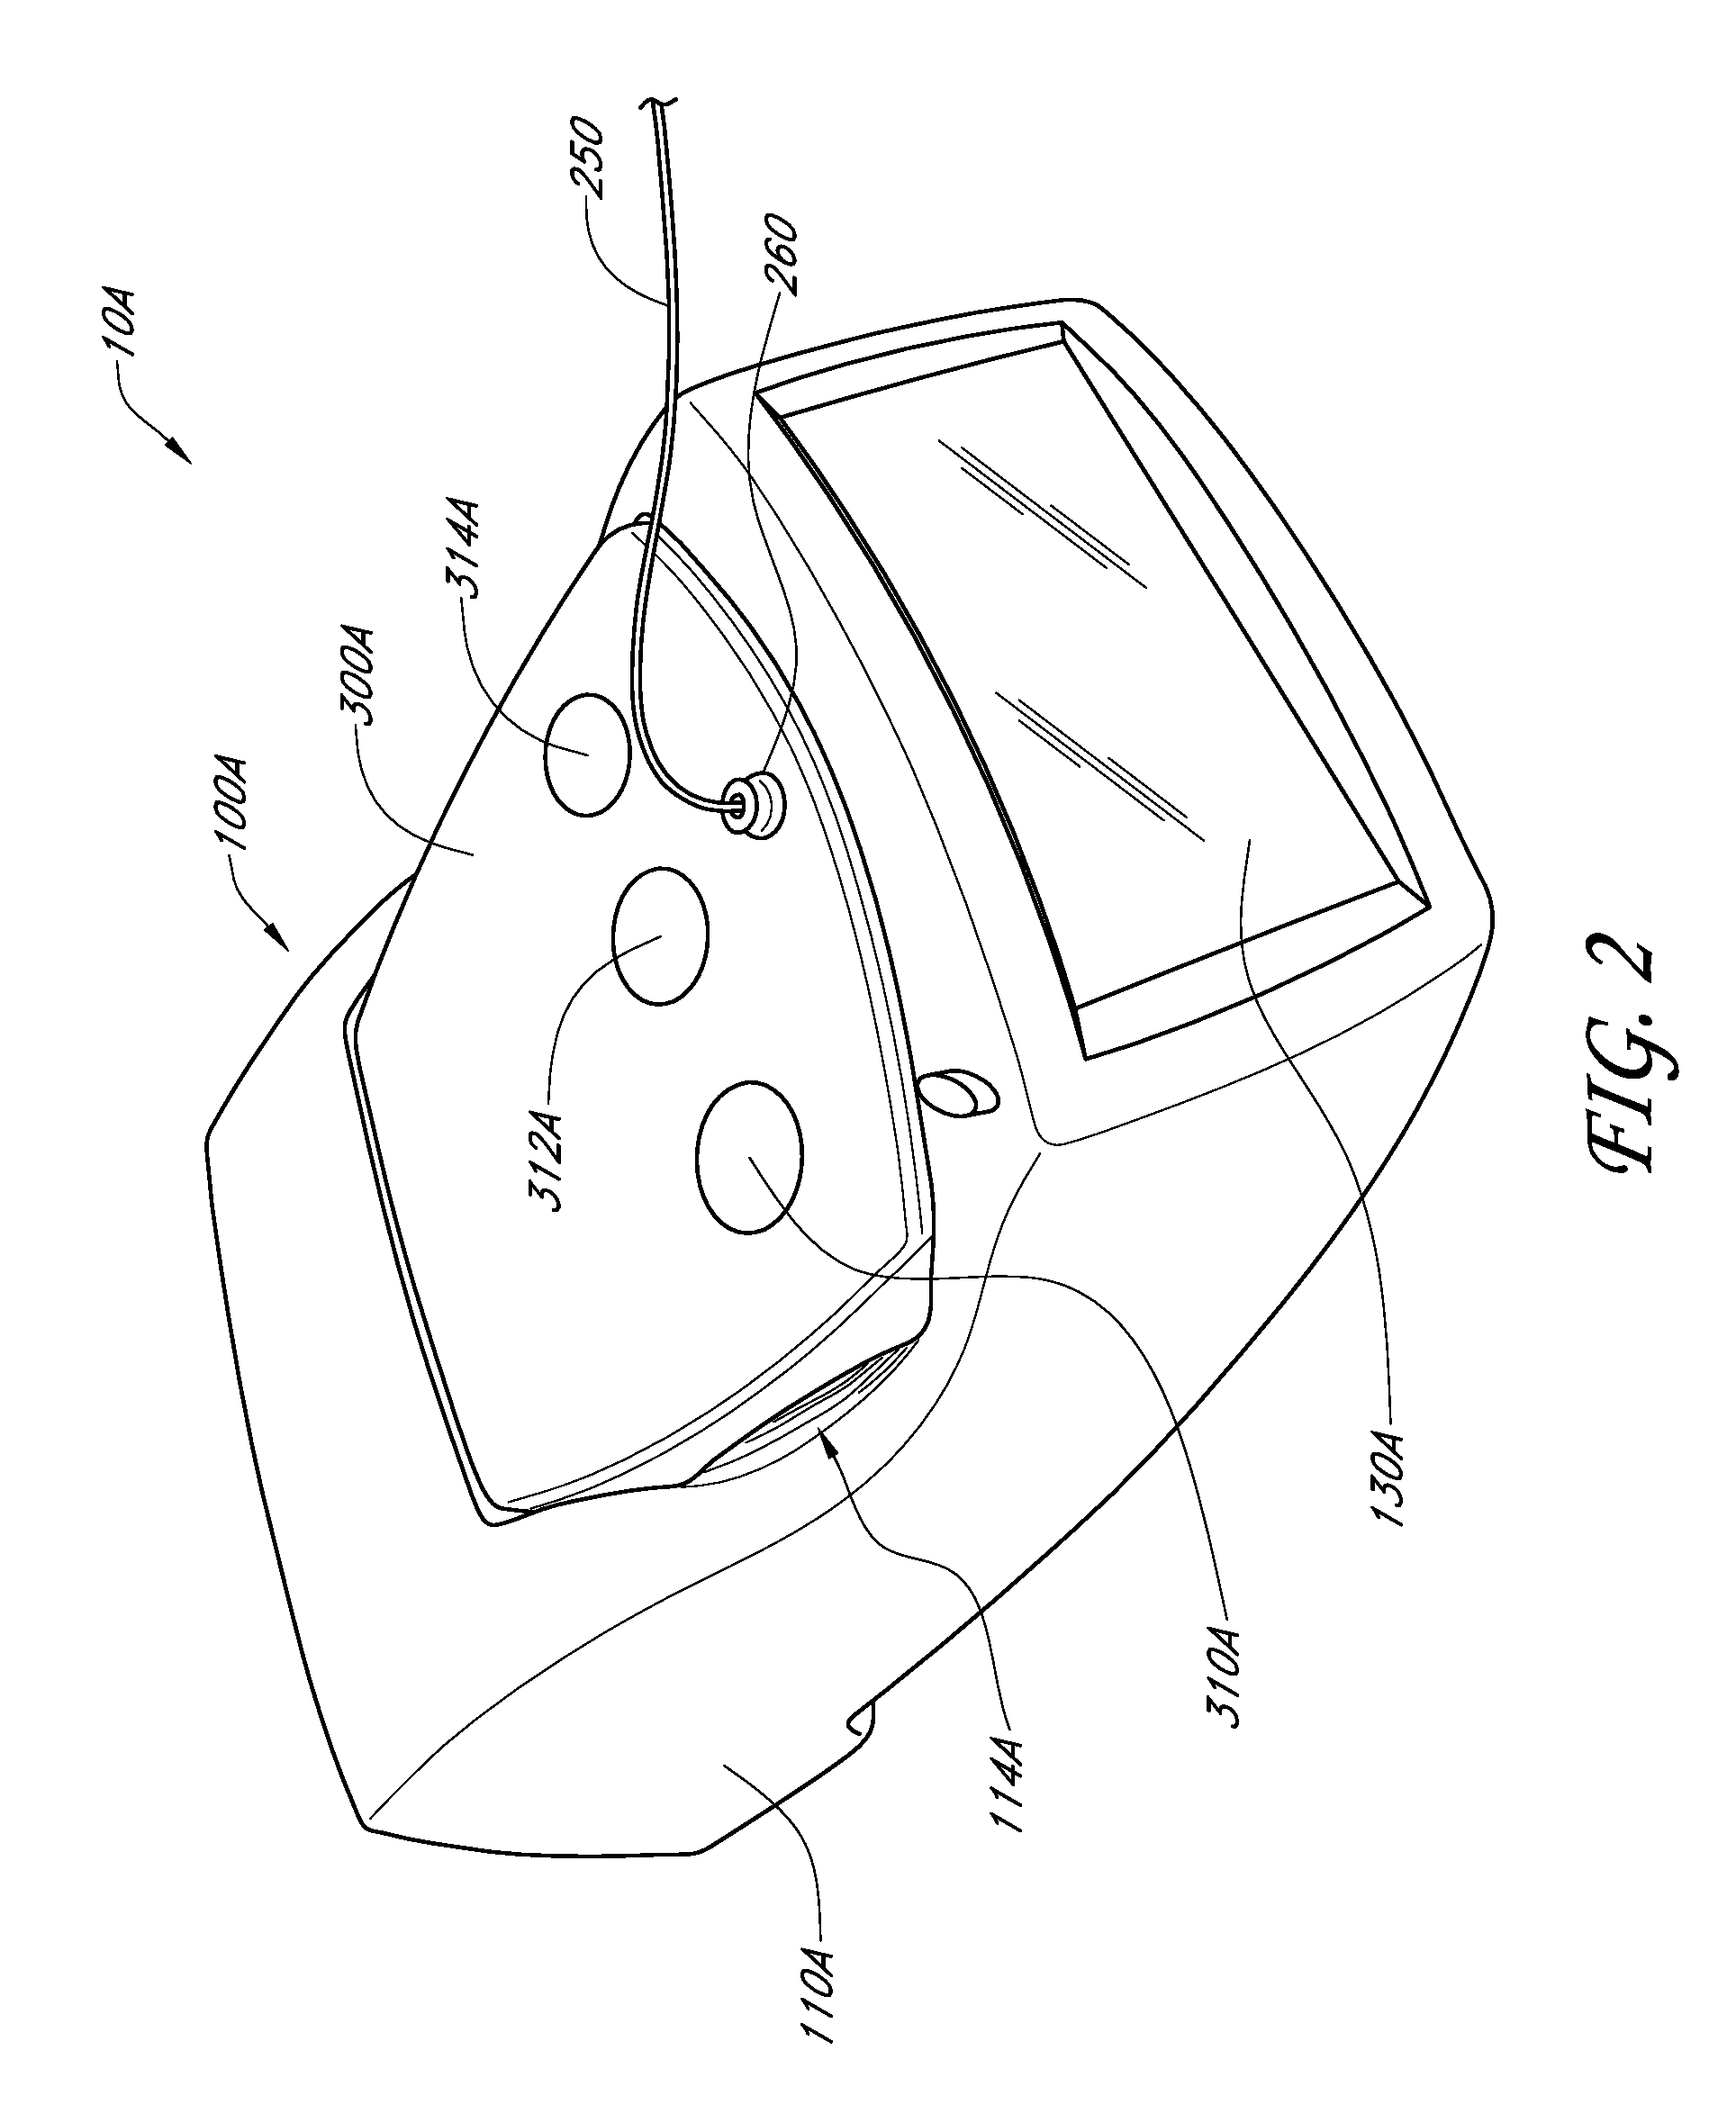 Injection system for delivering multiple fluids within the anatomy